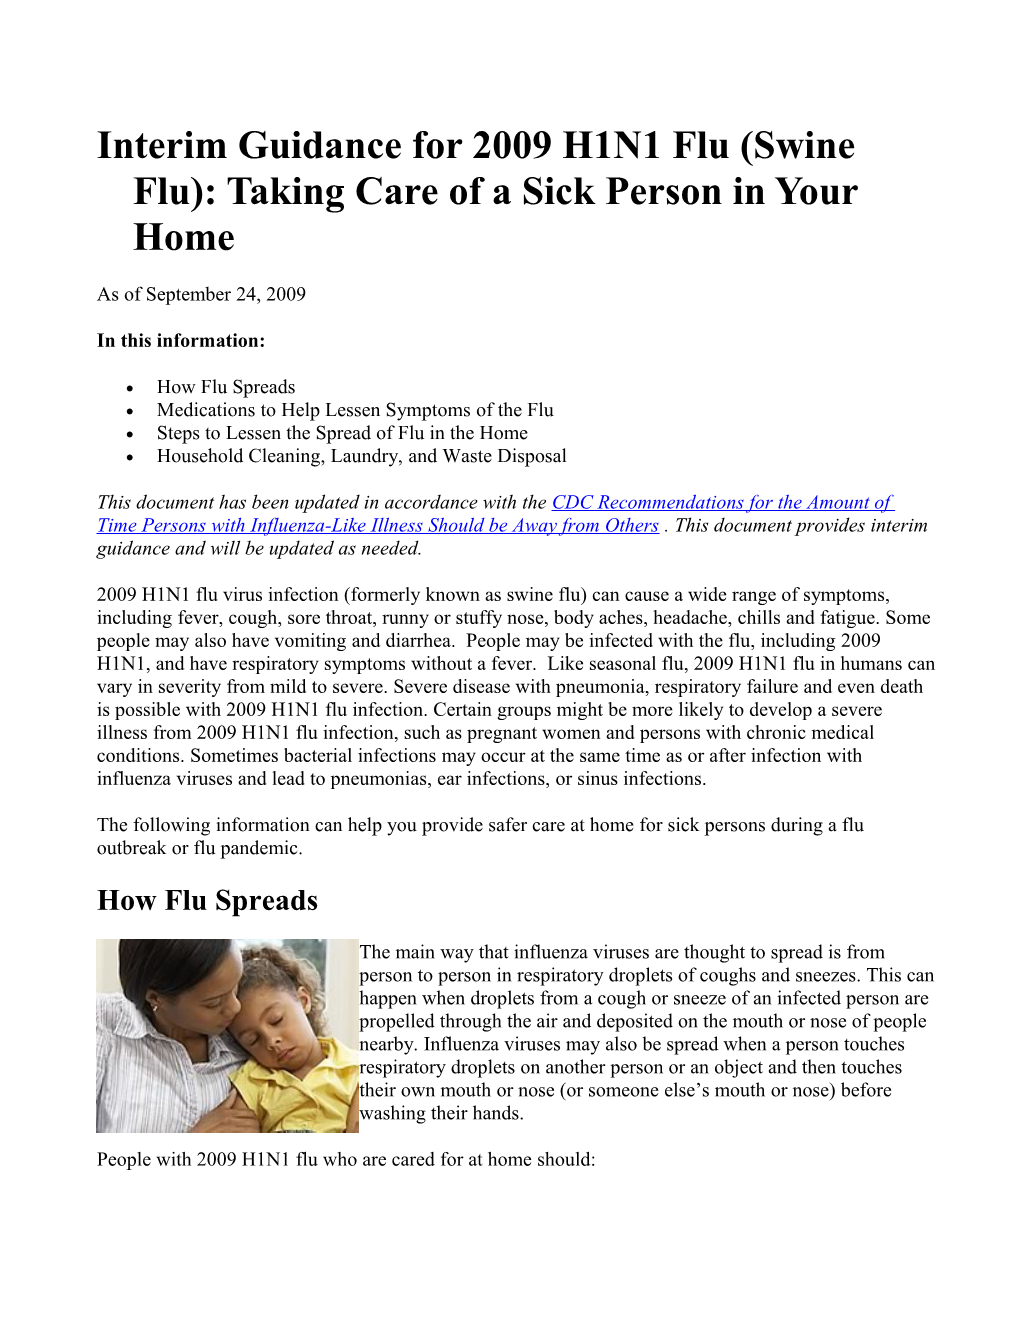 Interim Guidance for 2009 H1N1 Flu (Swine Flu): Taking Care of a Sick Person in Your Home